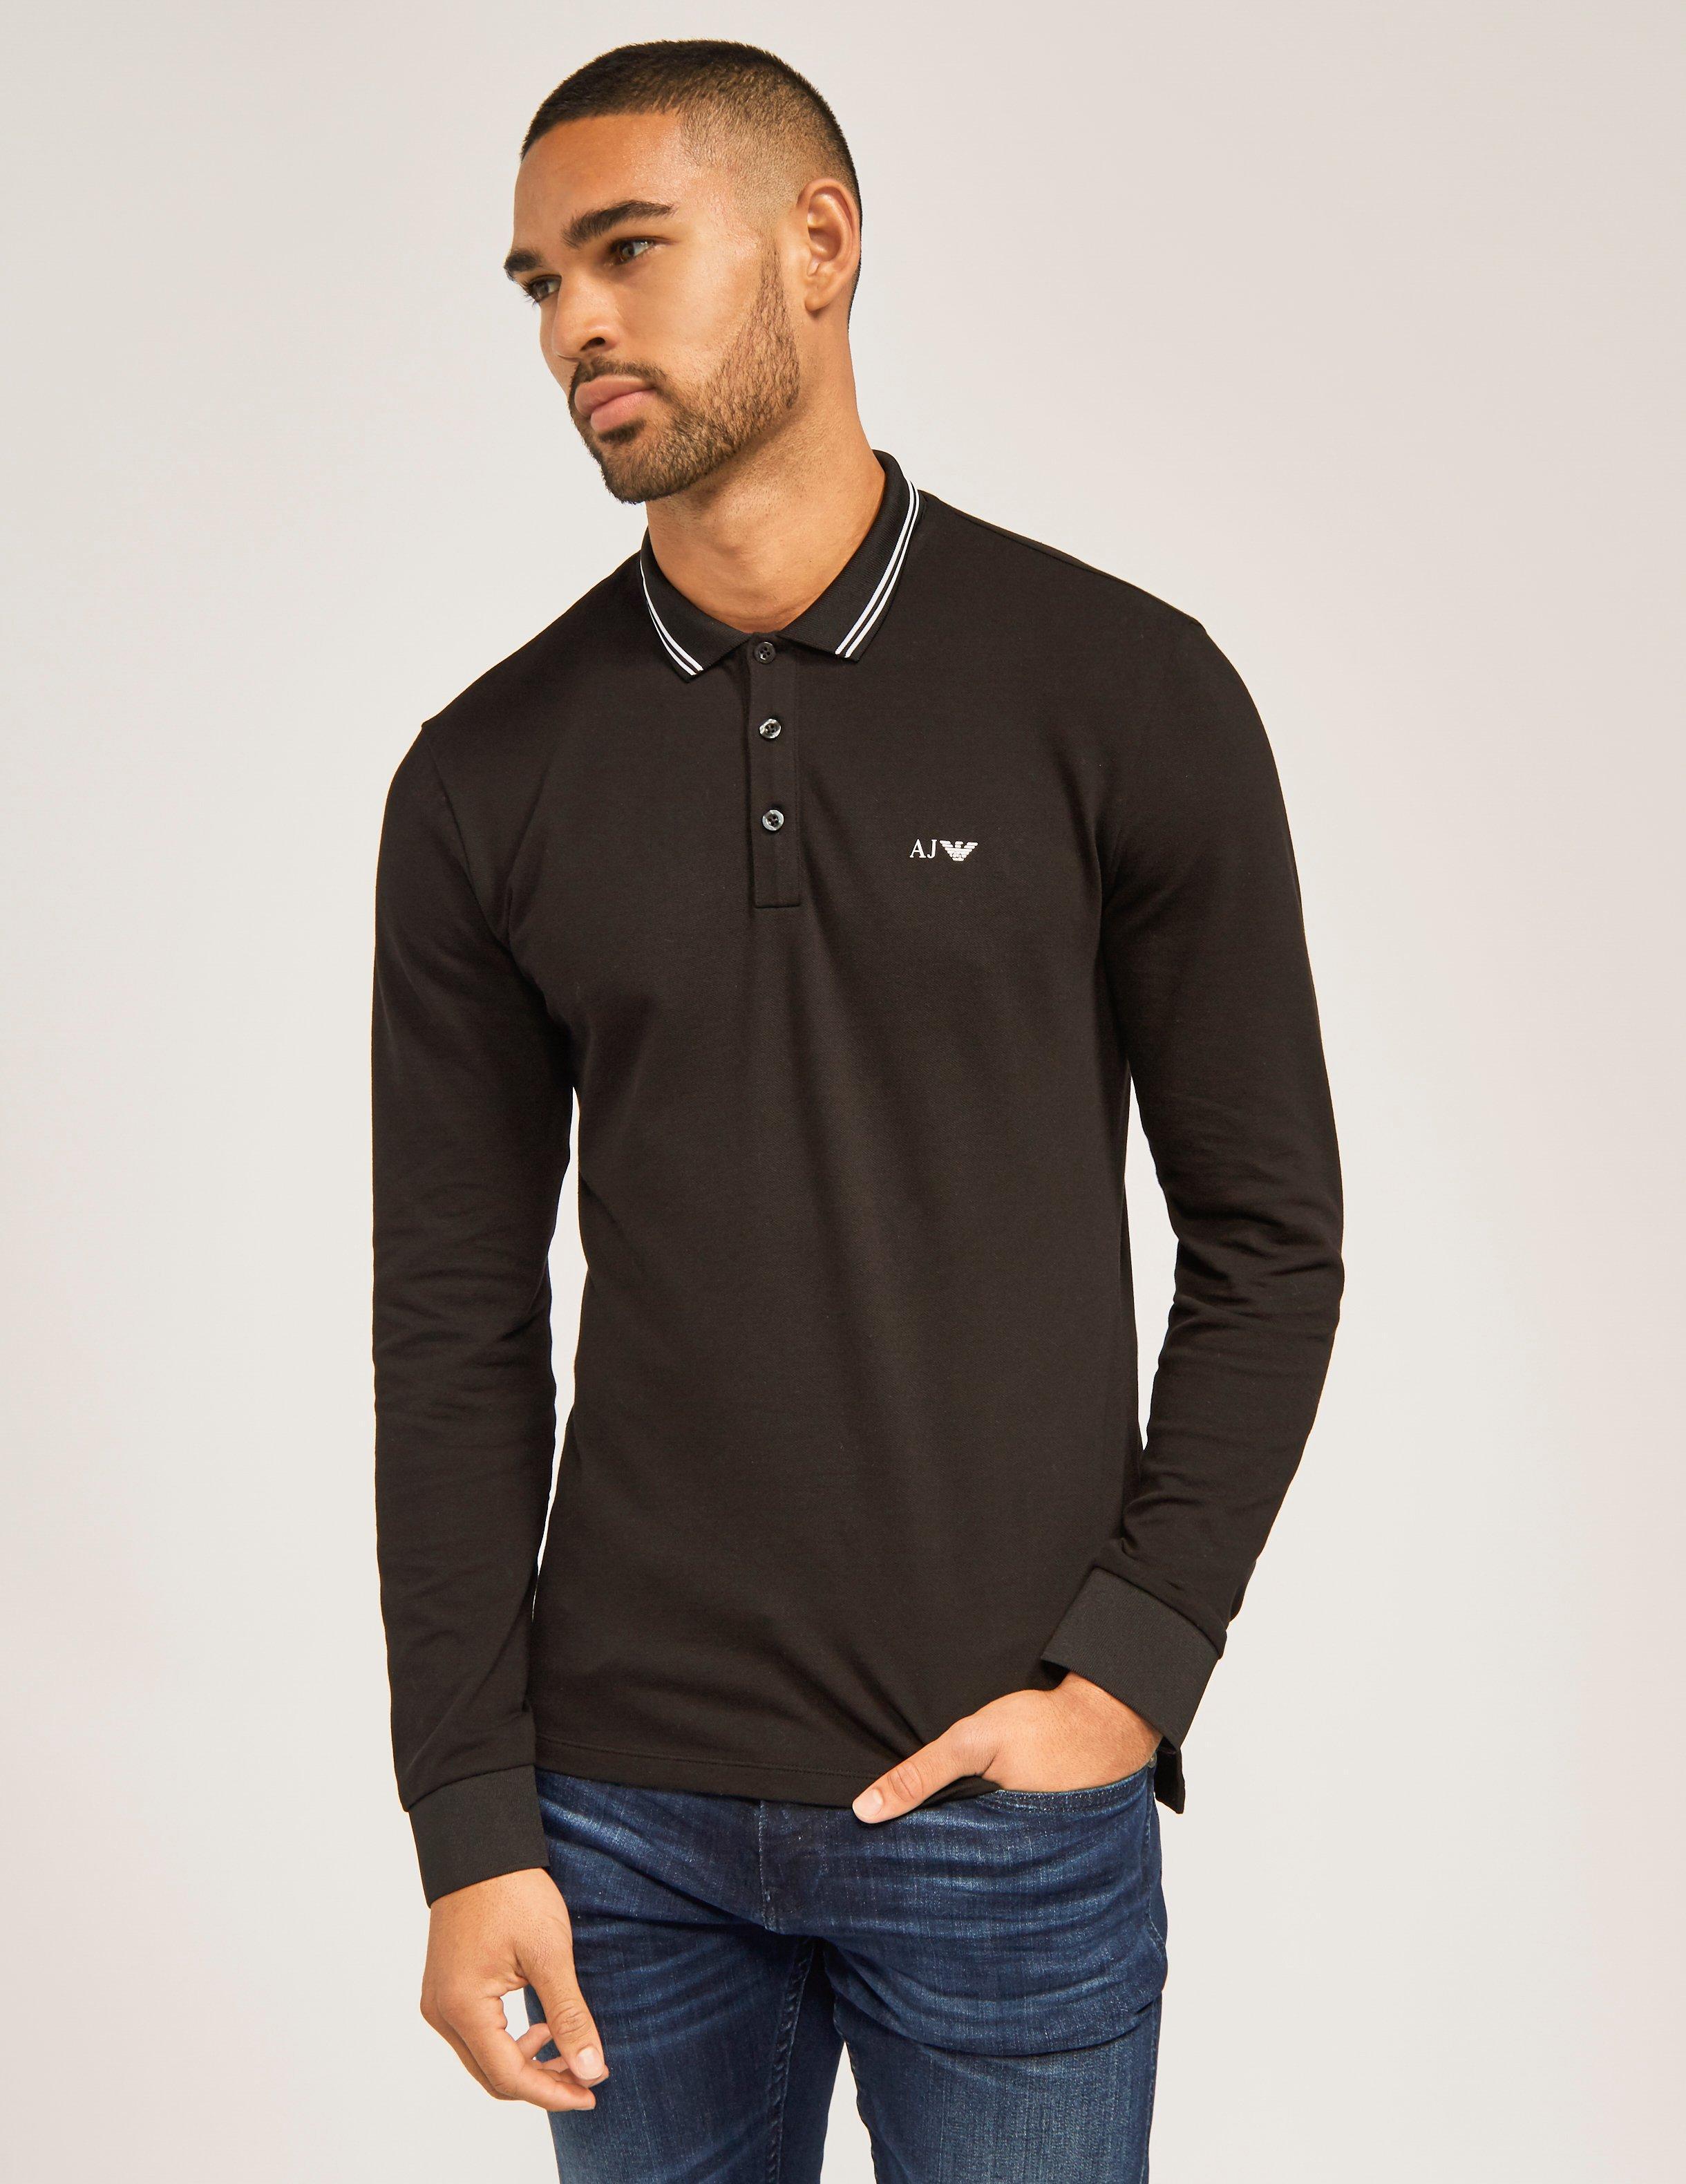 Armani Jeans Cotton Modern Fit Long Sleeve Polo Shirt in Black for Men -  Lyst